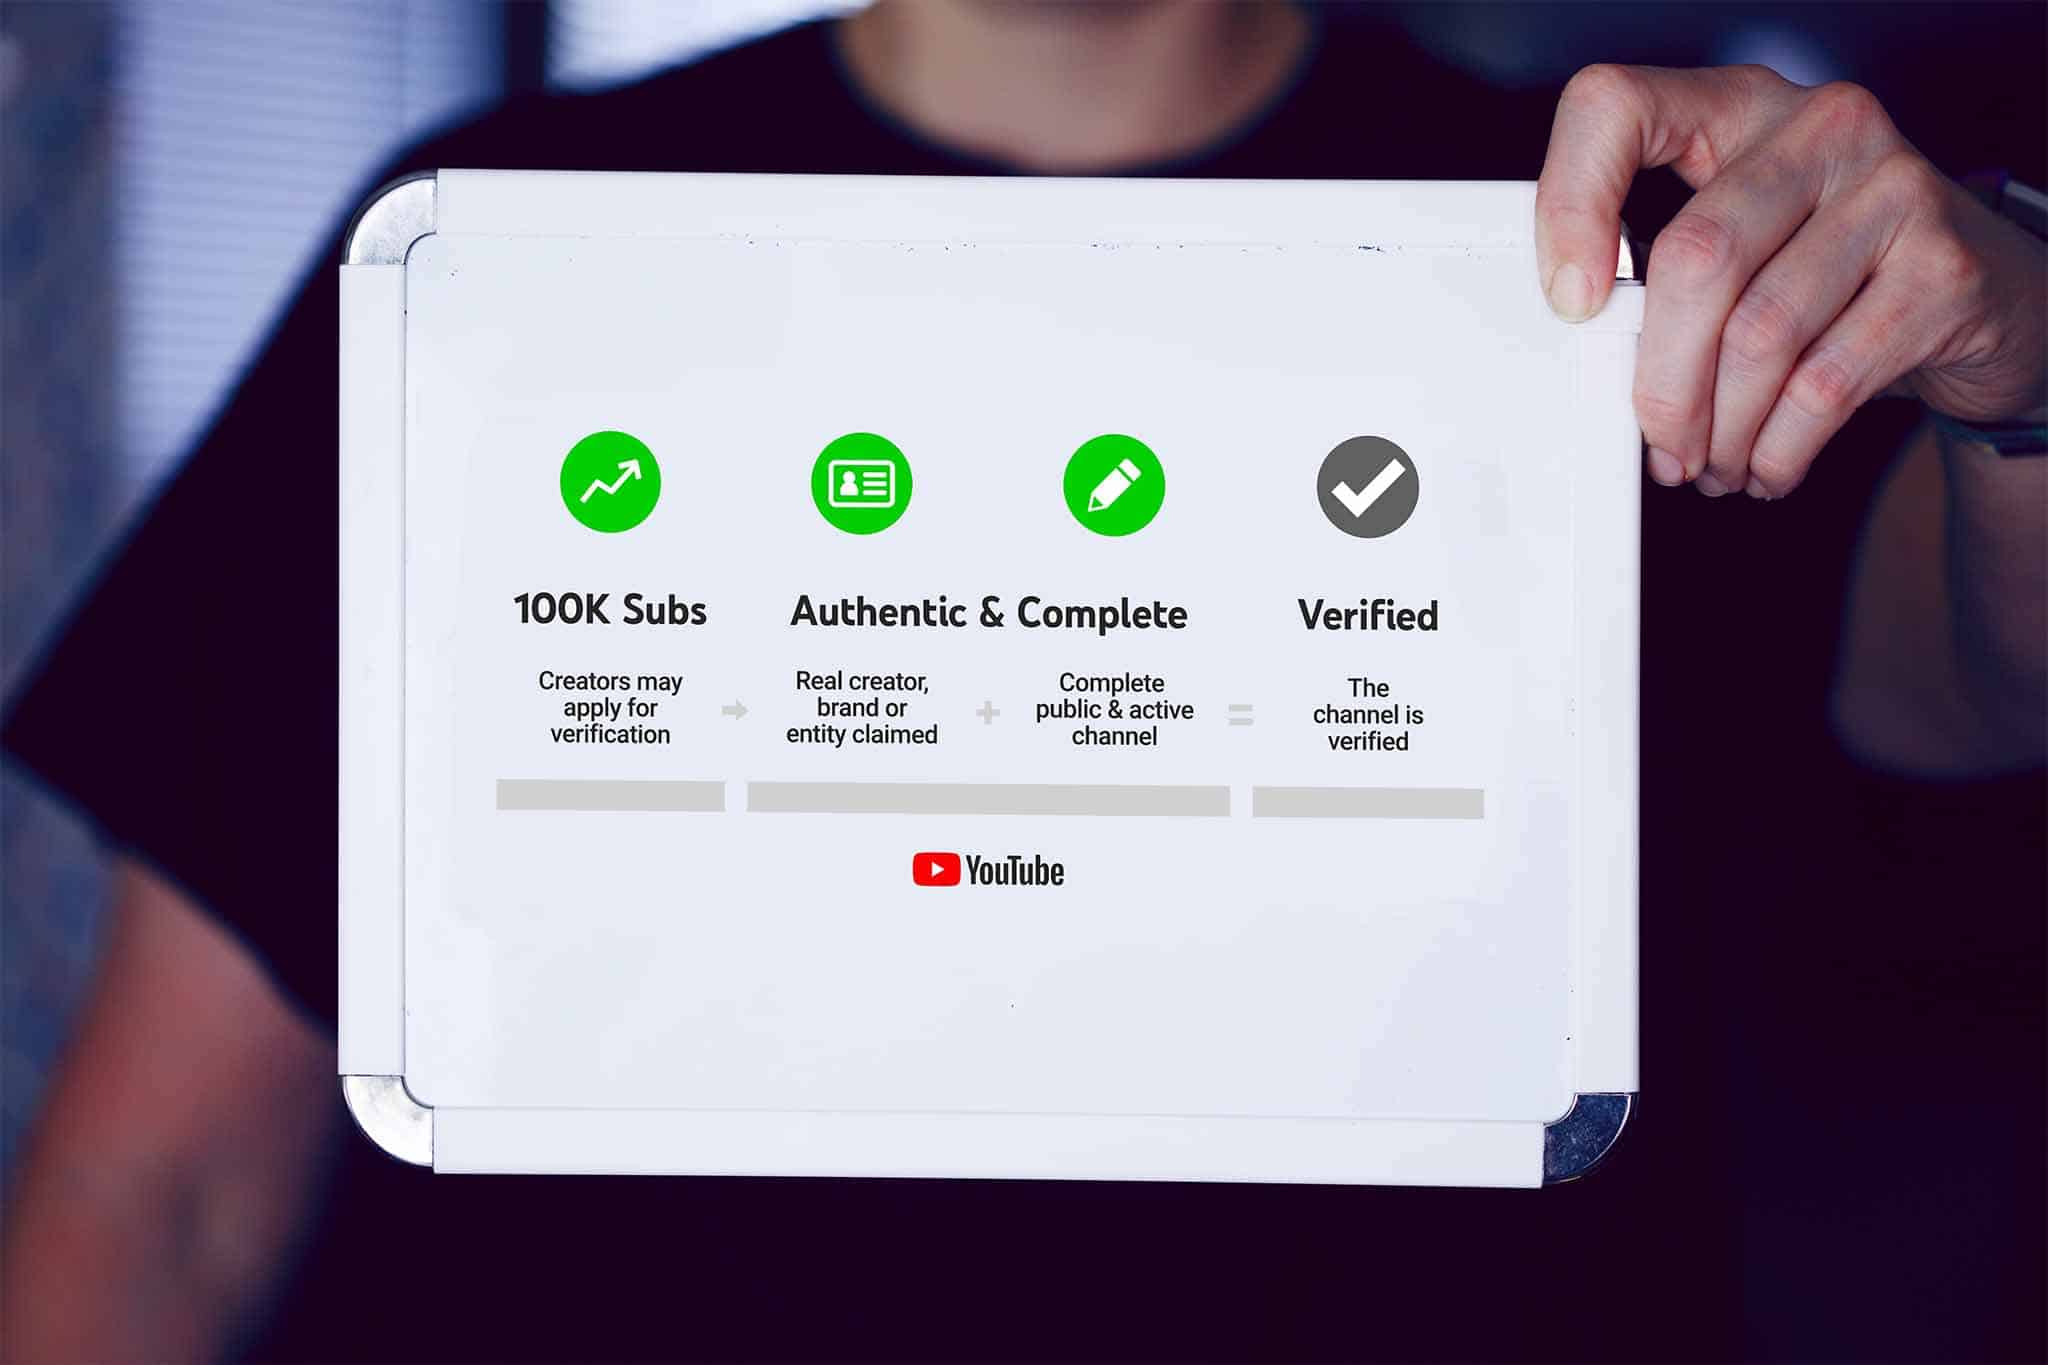 tablet-with-steps-to-optimize-your-channel-on-youtube